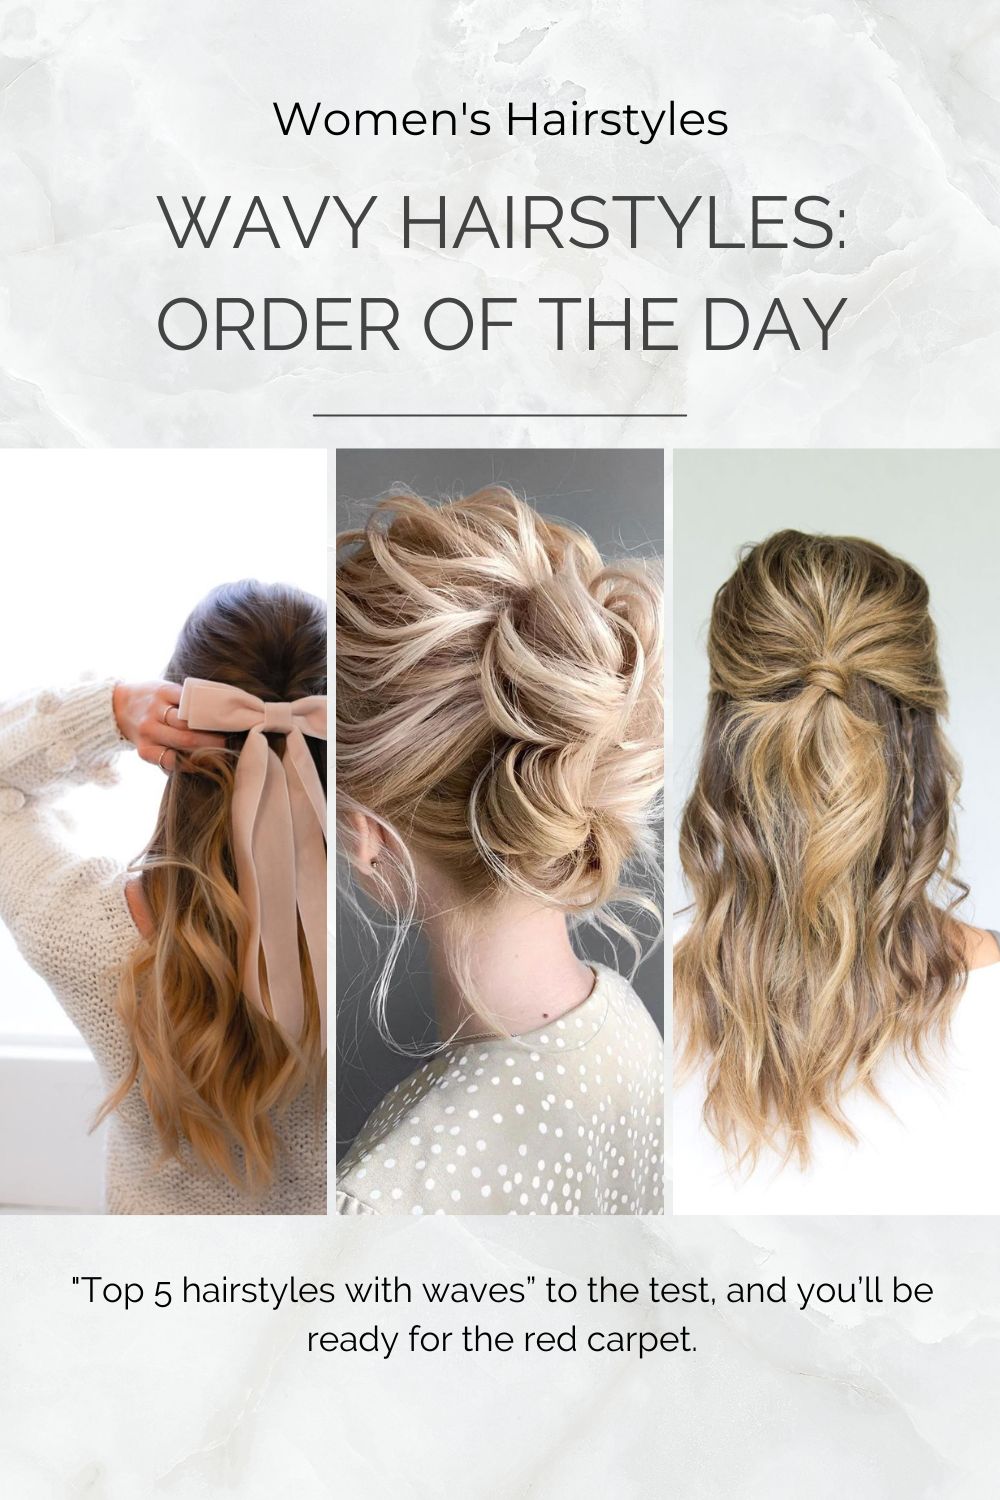 Wavy Hairstyles: Order of the Day